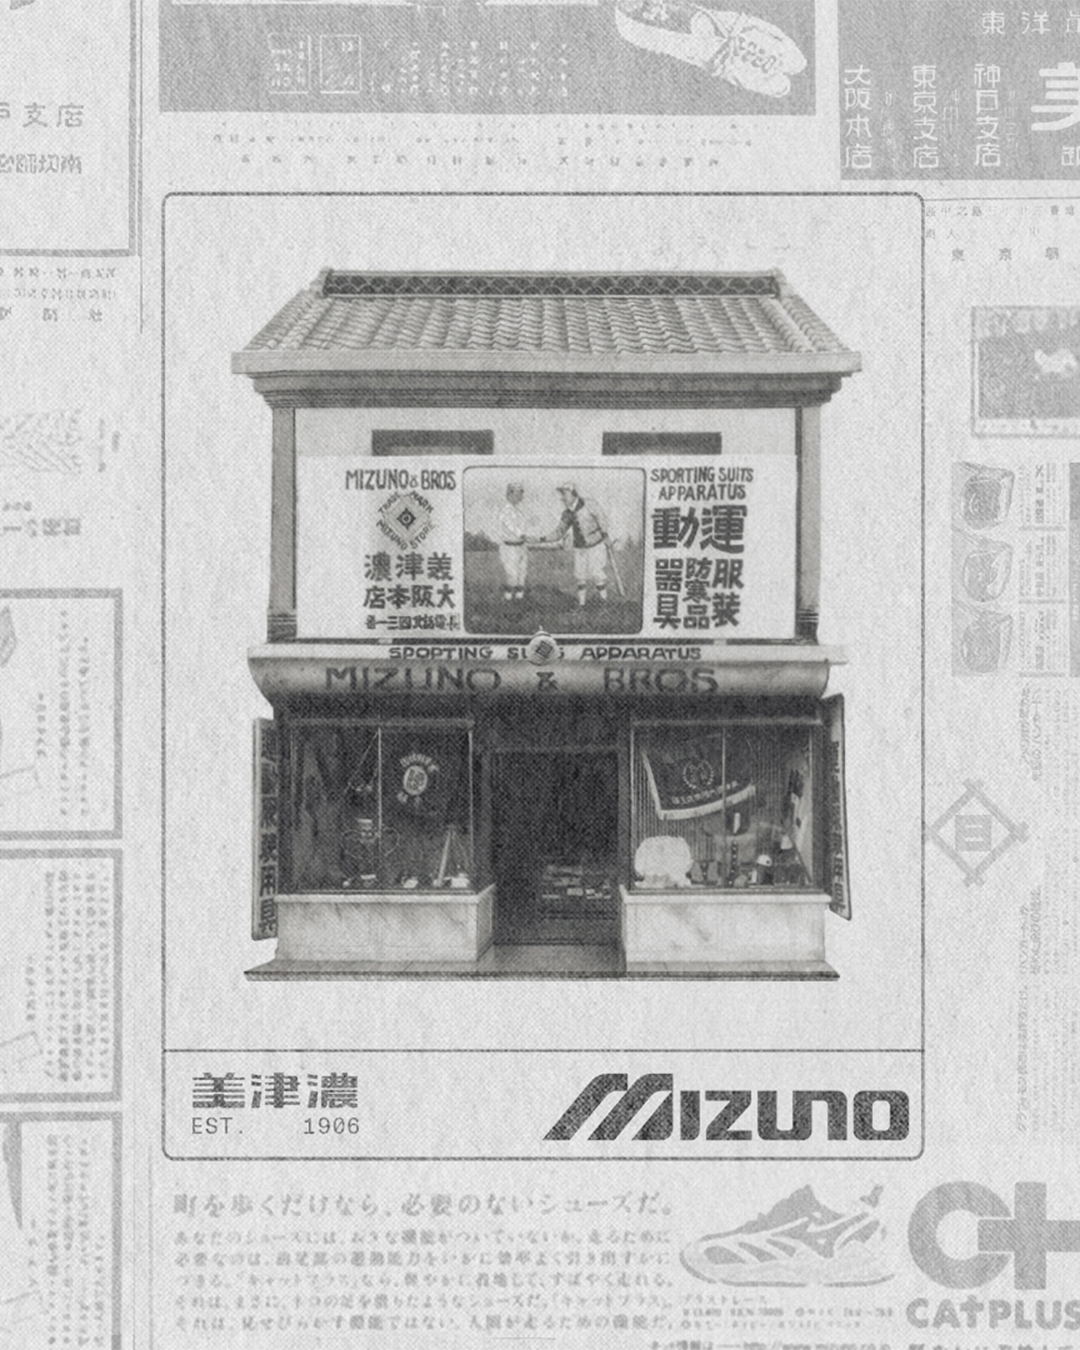 FROM BASEBALL TO TRAIL, THE HISTORY OF MIZUNO SNEAKERS​